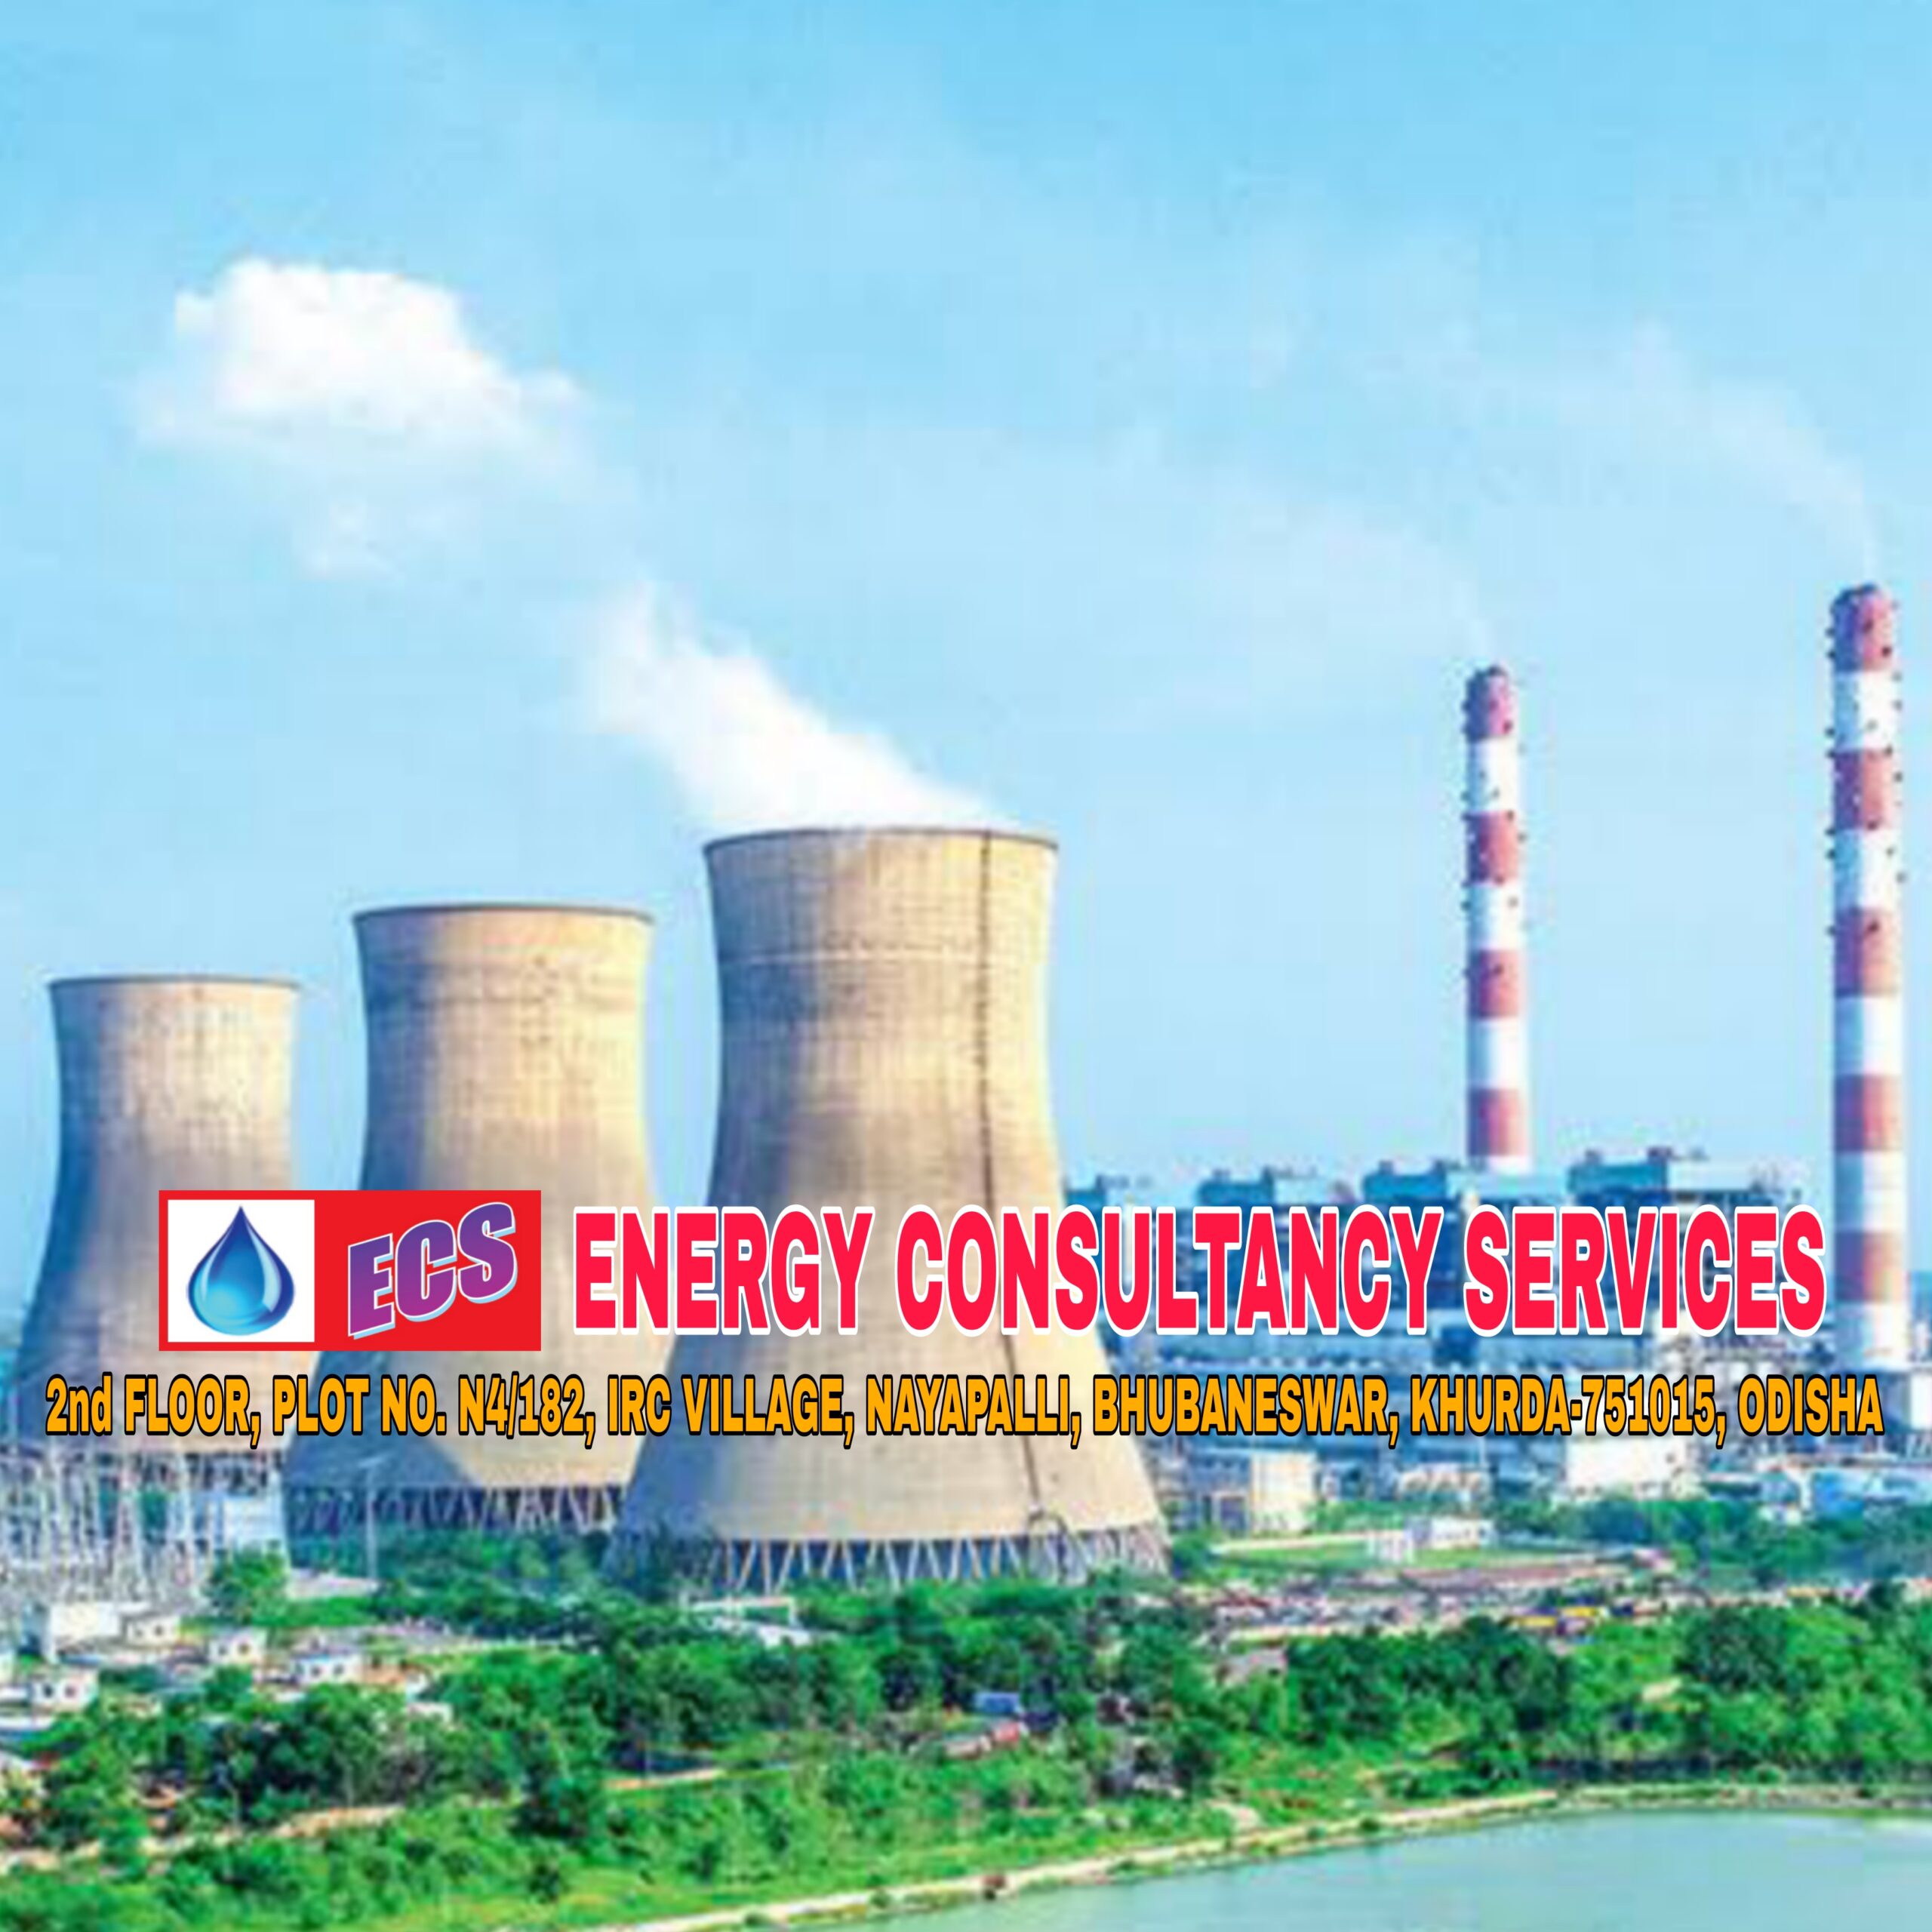 ENERGY CONSULTANCY SERVICES